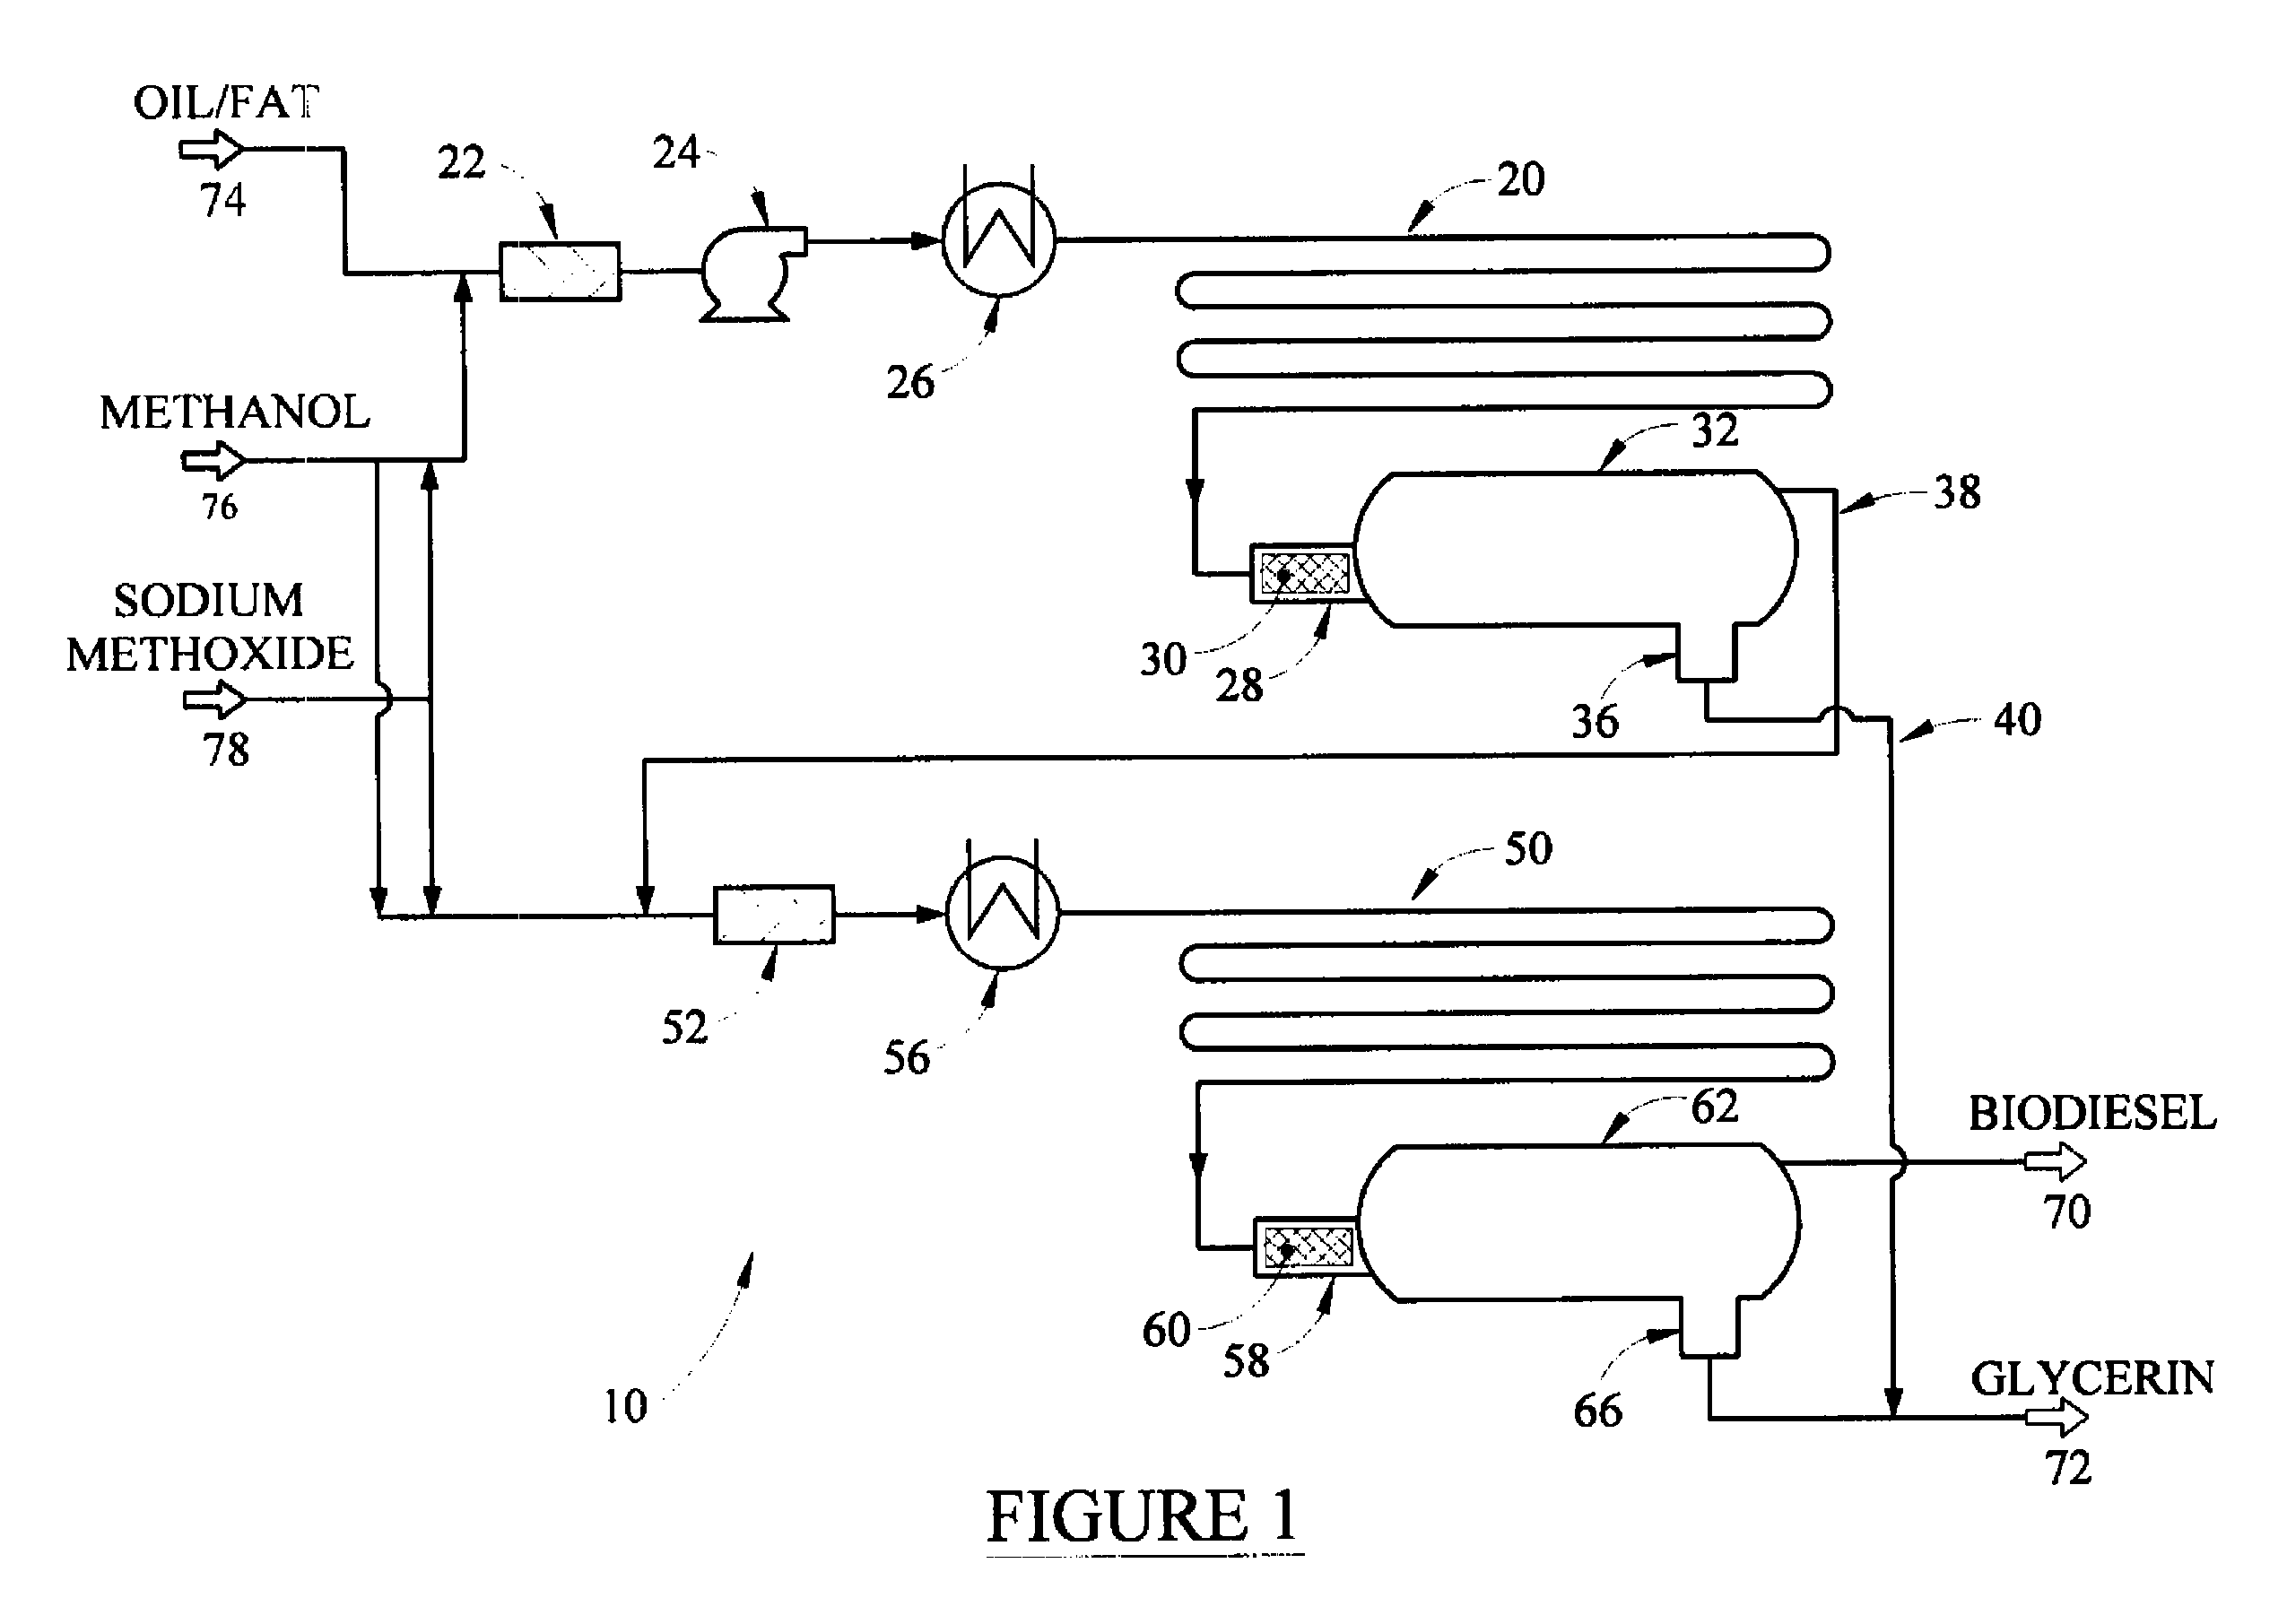 Devices, processes and methods for the production of lower alkyl esters